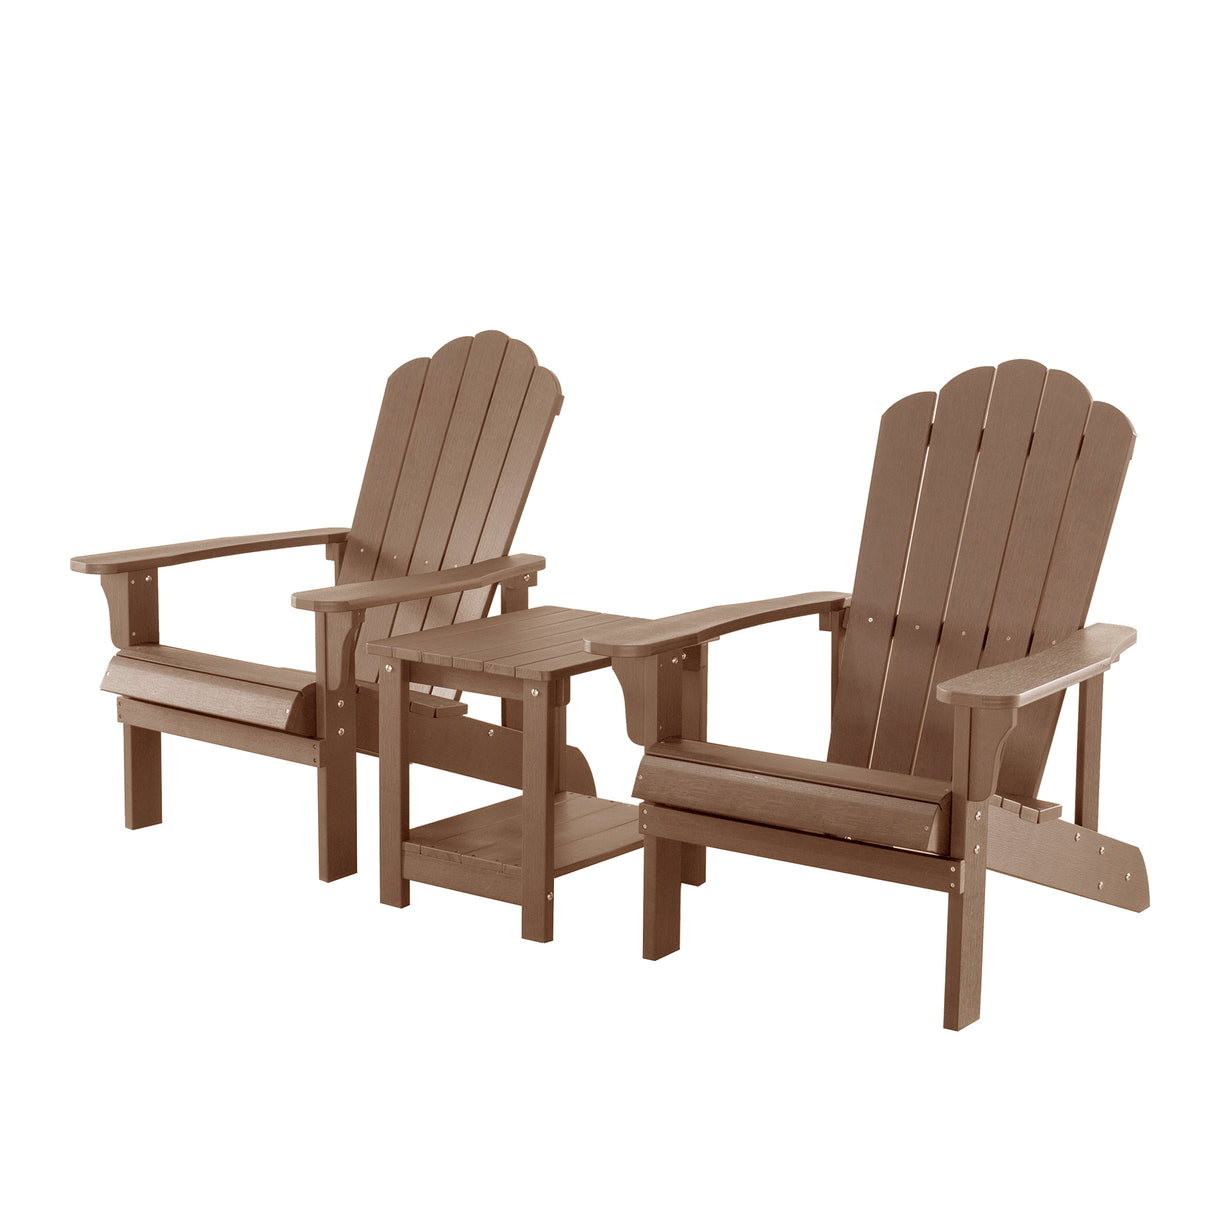 Key West 3 Piece Outdoor Patio All-Weather Plastic Wood Adirondack Bistro Set, 2 Adirondack chairs, and 1 small, side, end table
set for Decks, Backyards, Gardens, Lawns, Poolside, and Beaches, Brown